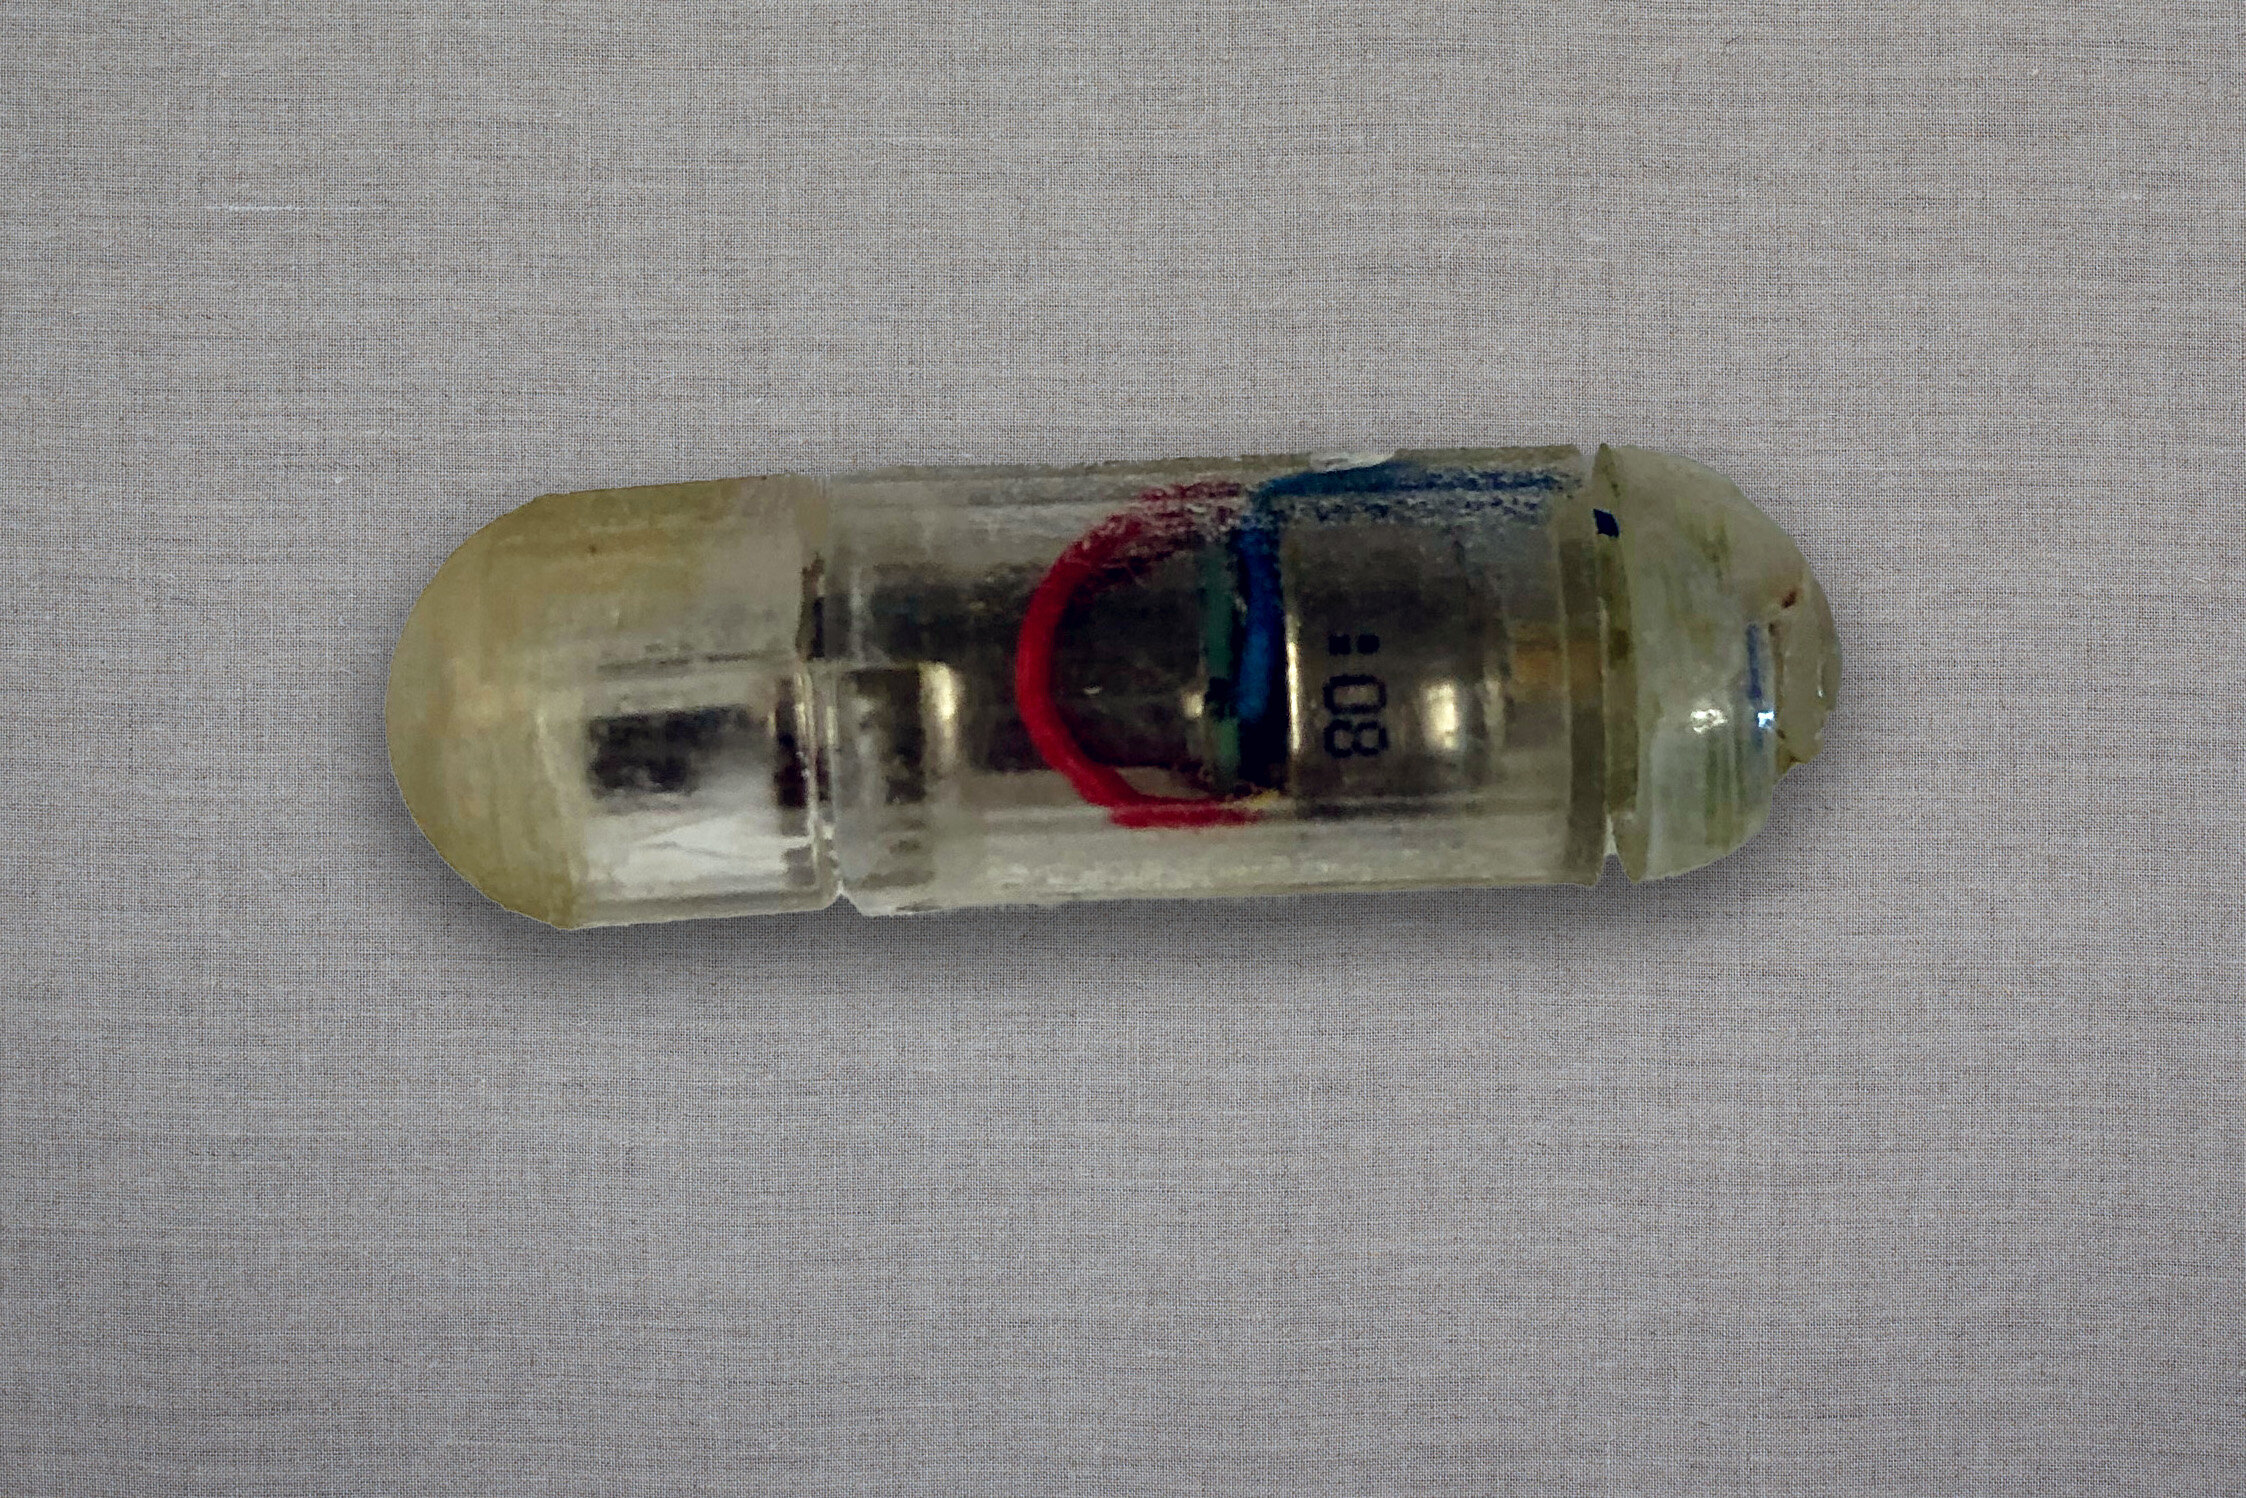 Engineers develop a vibrating, ingestible capsule that might help treat